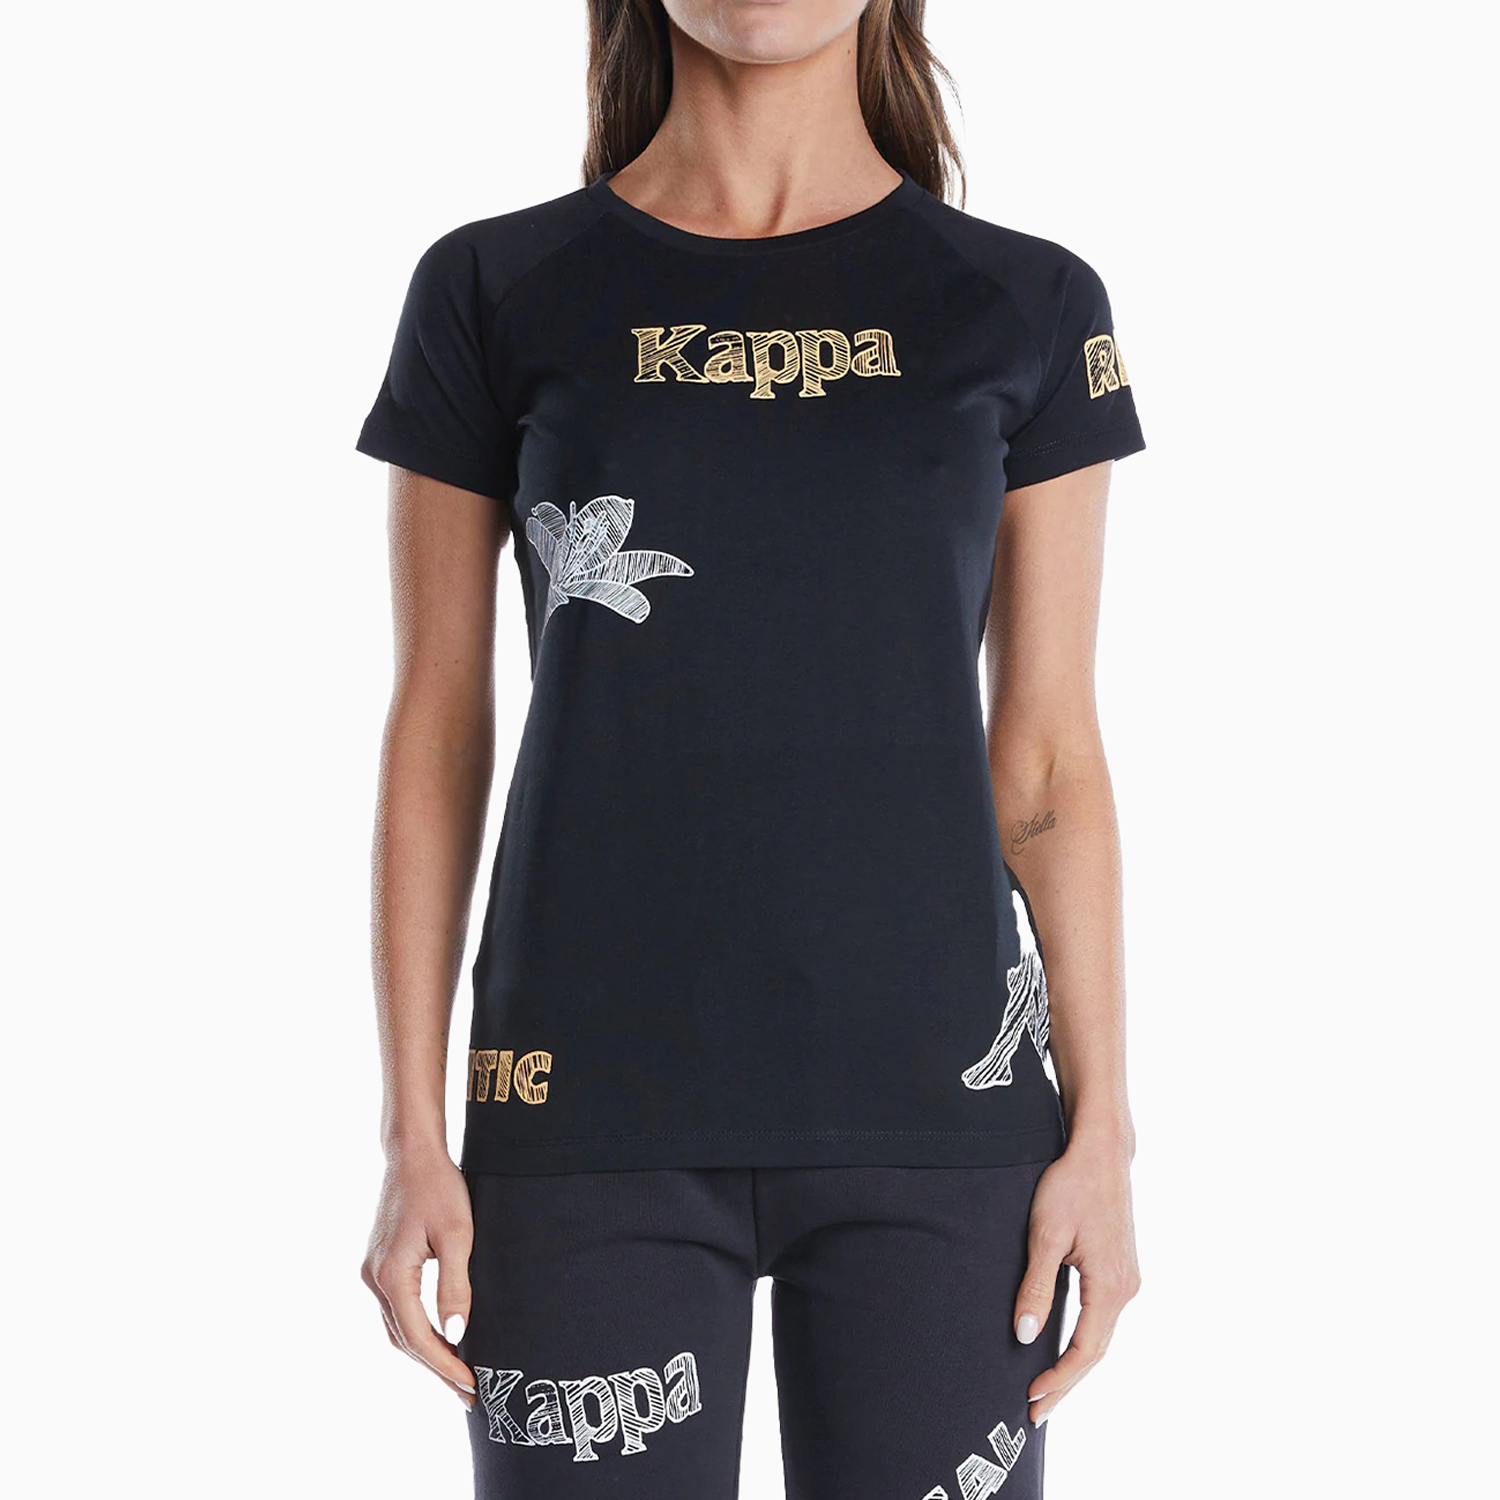 kappa-womens-authentic-graphik-tibi-outfit-371f16w-a01-351b2bw-a01